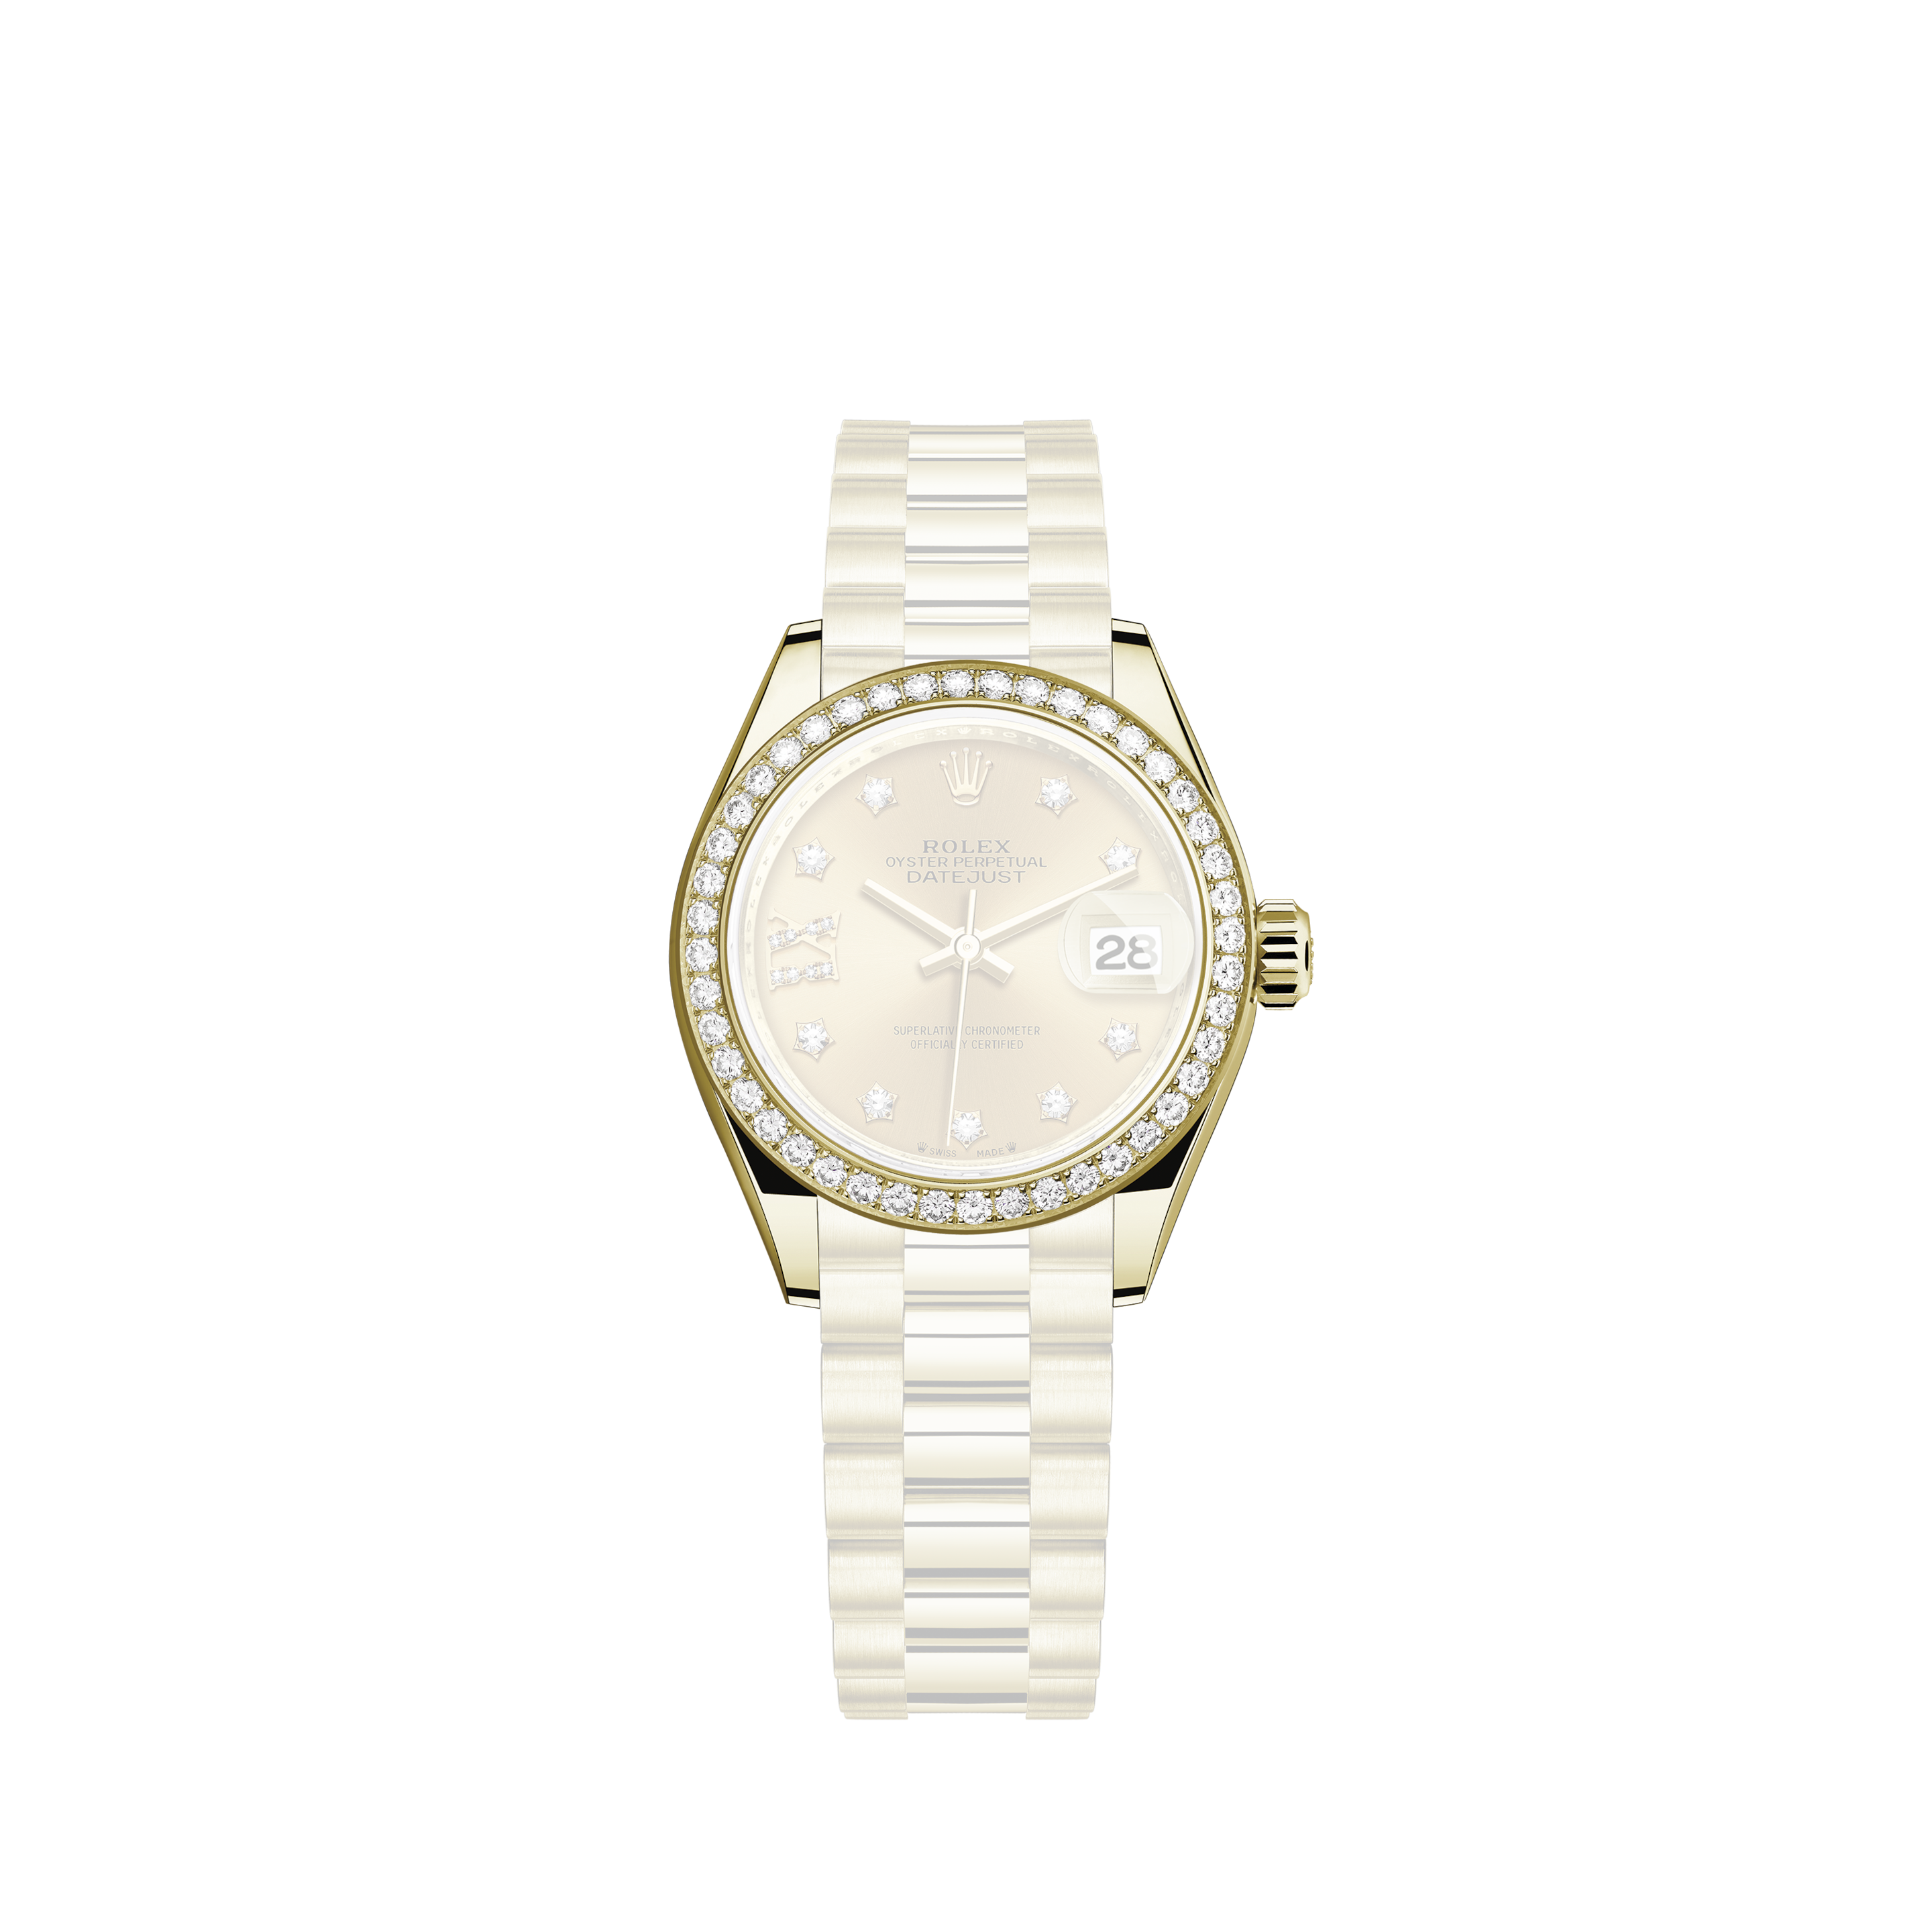 Rolex Datejust II Iced-Out 19.00 Cts VS1 Diamond Quality / Diamond Dial